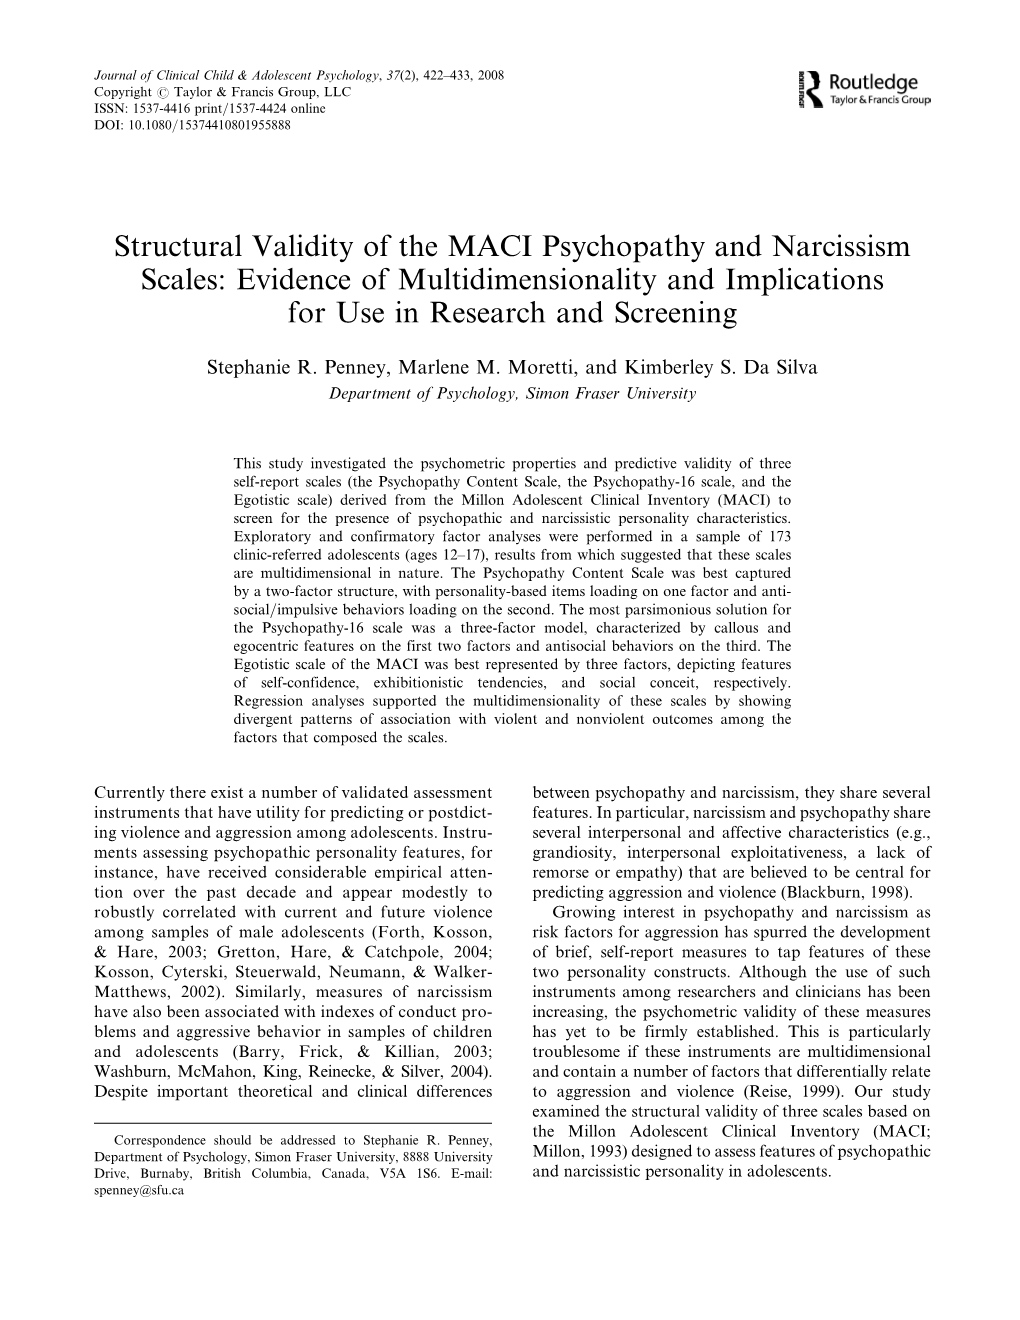 Structural Validity of the MACI Psychopathy and Narcissism Scales: Evidence of Multidimensionality and Implications for Use in Research and Screening